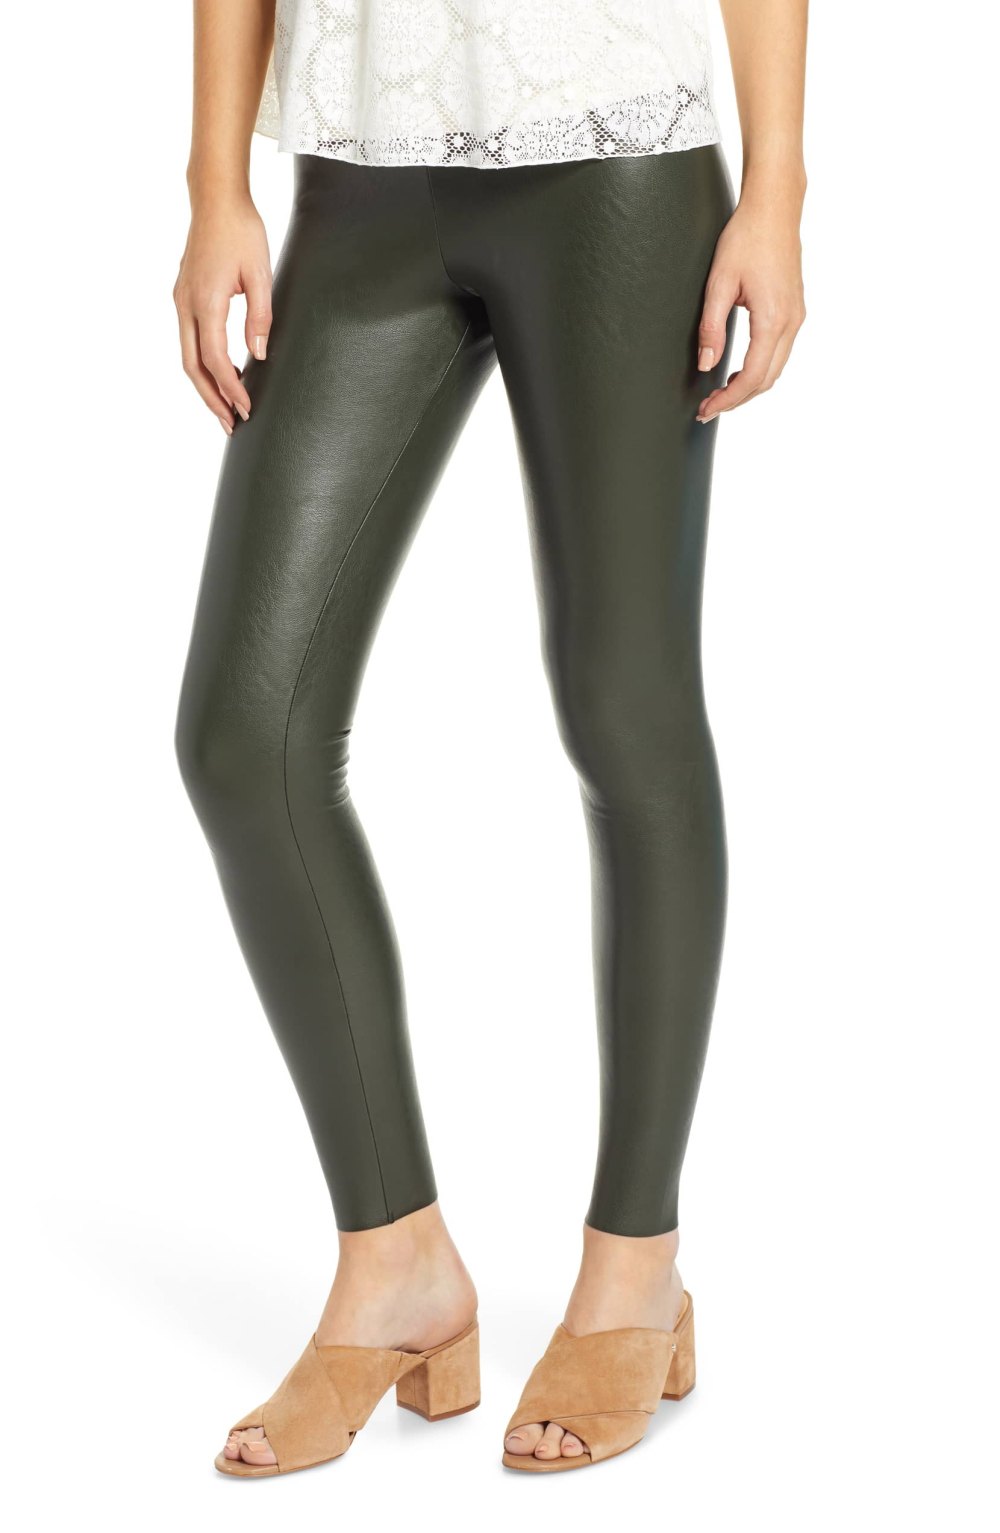 The Faux Leather Leggings We're Never Taking Off | Us Weekly